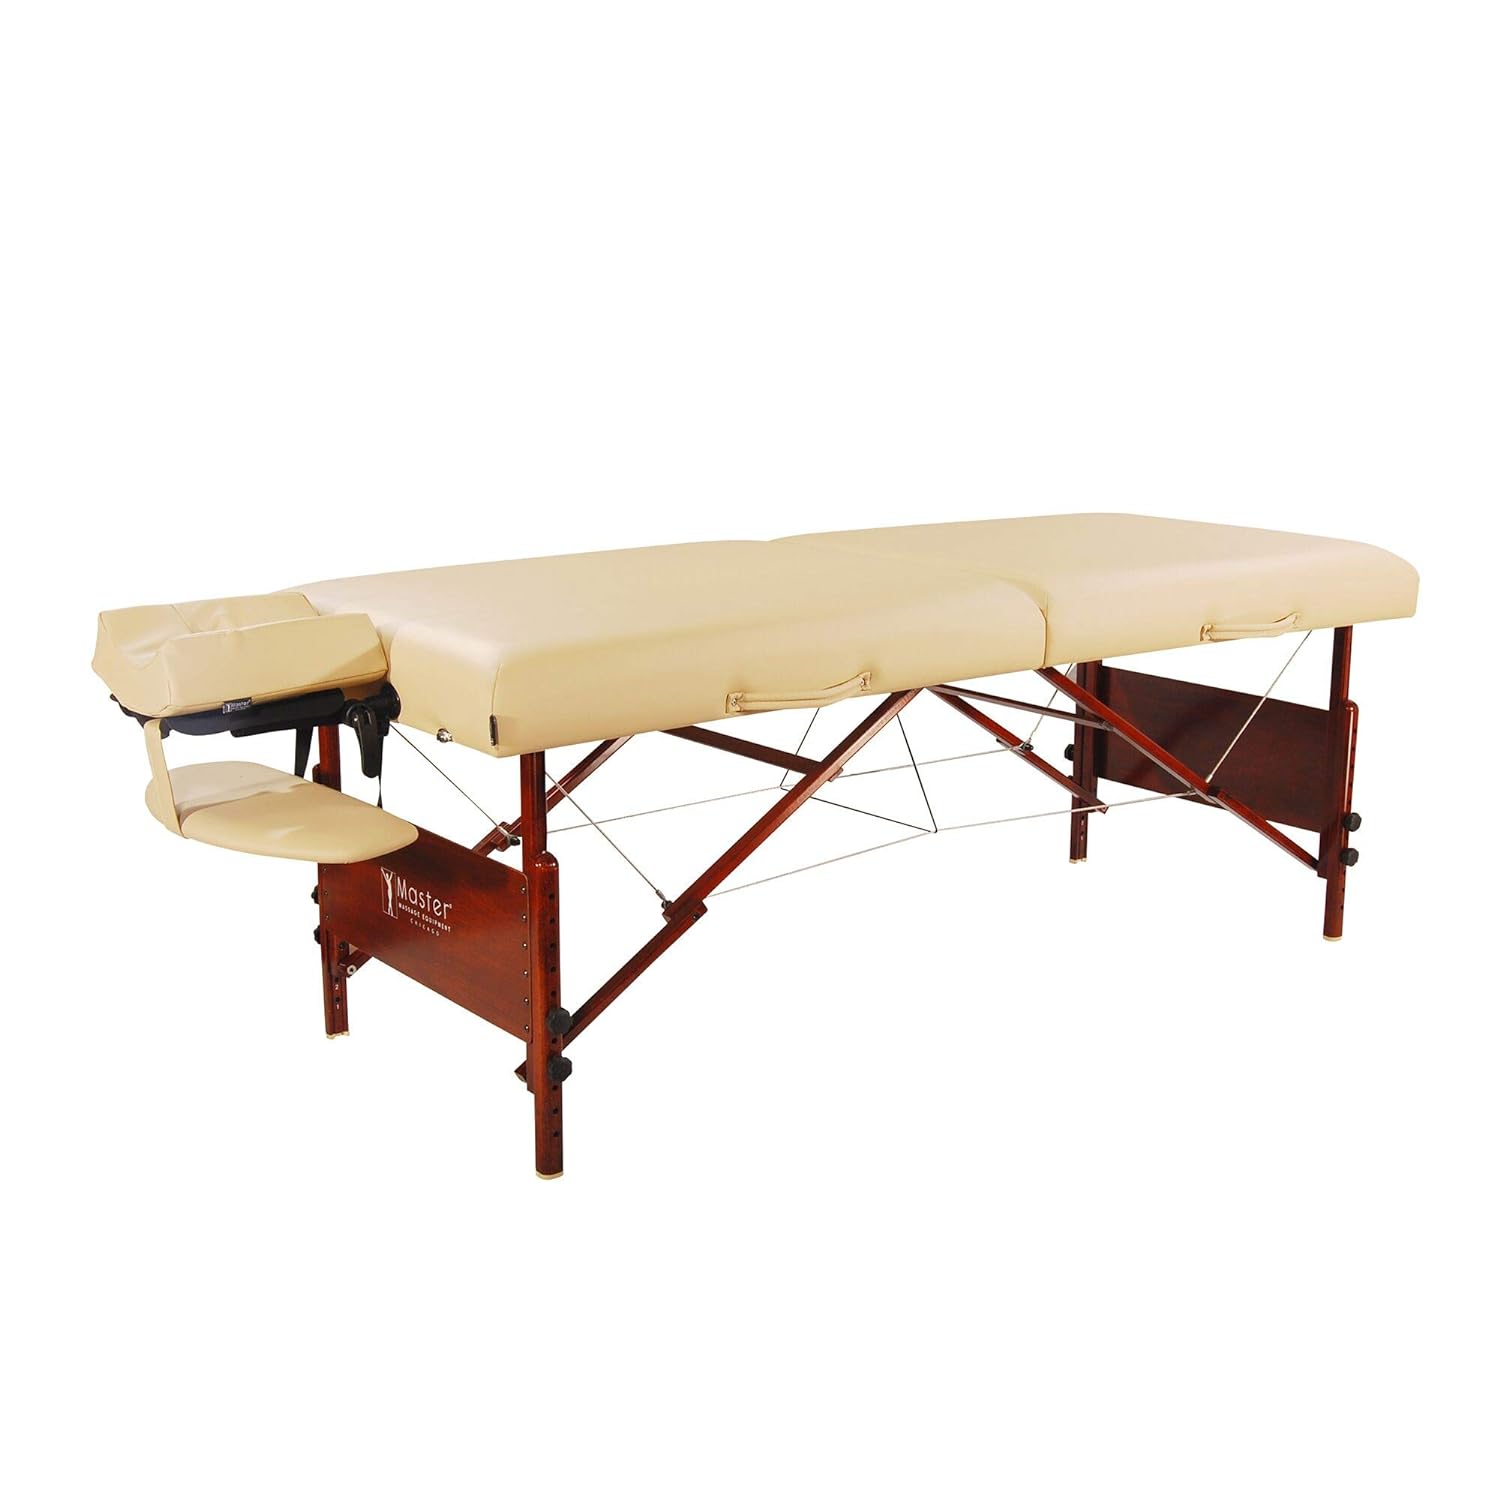 Master Massage 30" Del Ray Pro Portable Massage Table Package, Sand Color, Luxurious with 3" Thick Cushion of Foam